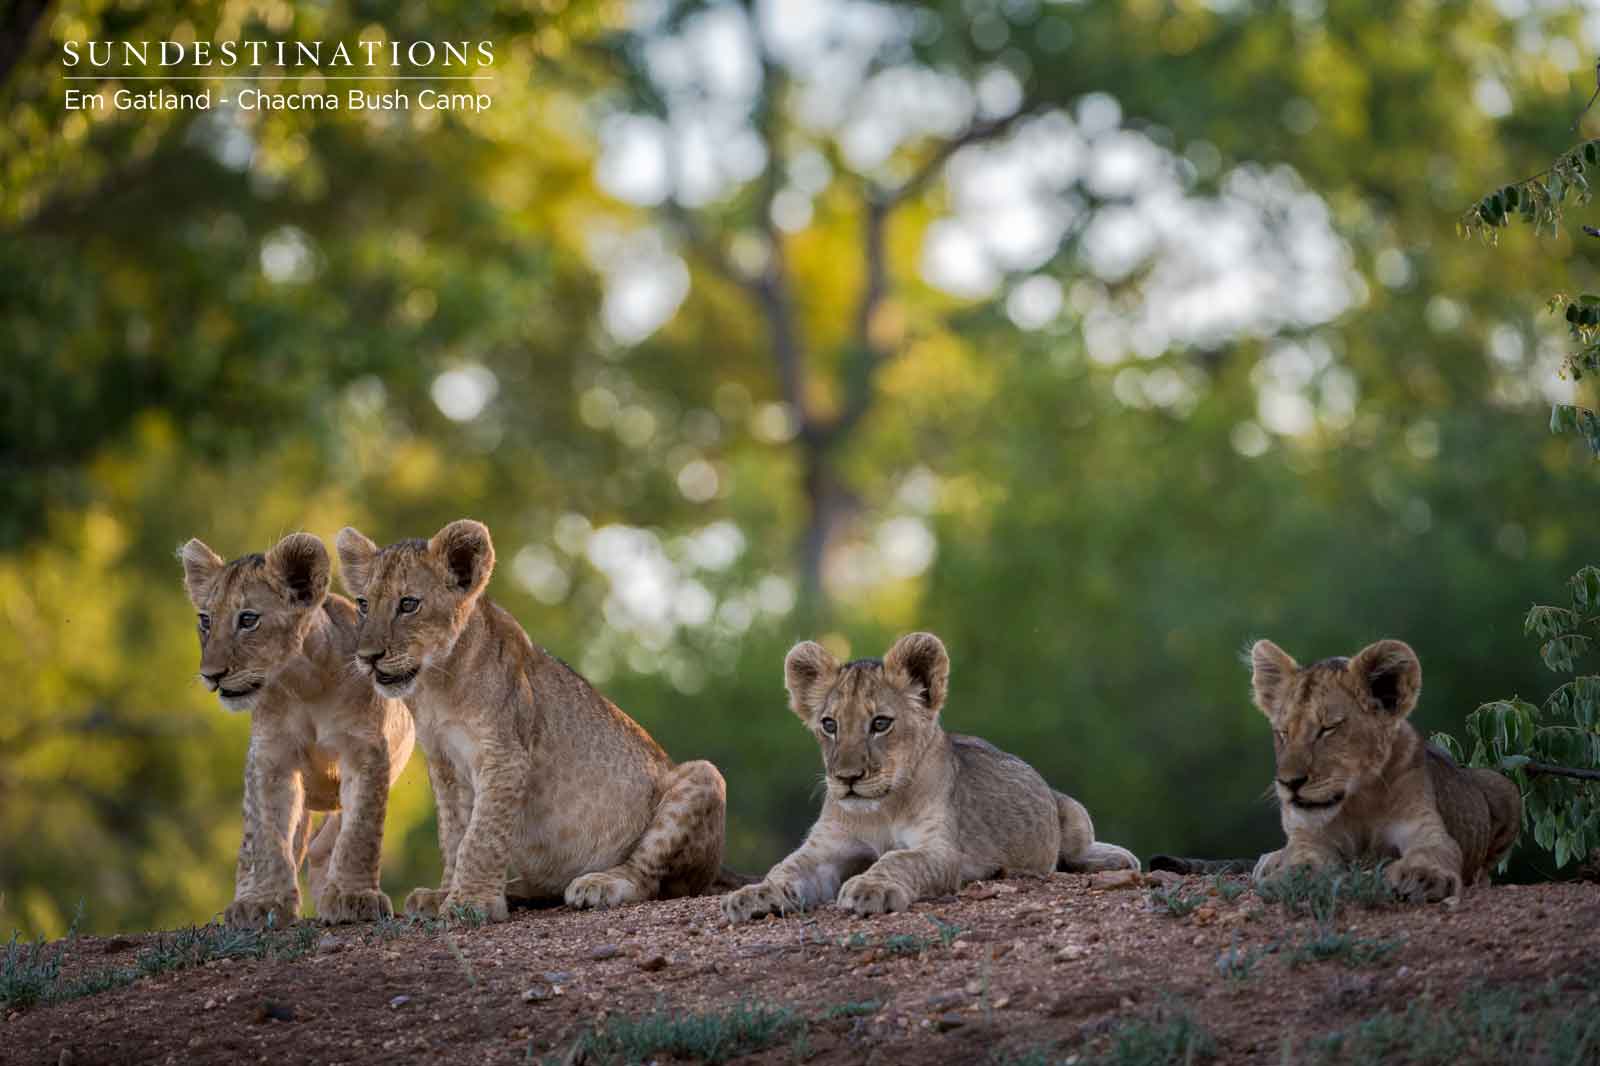 Lion Cubs at Chacma